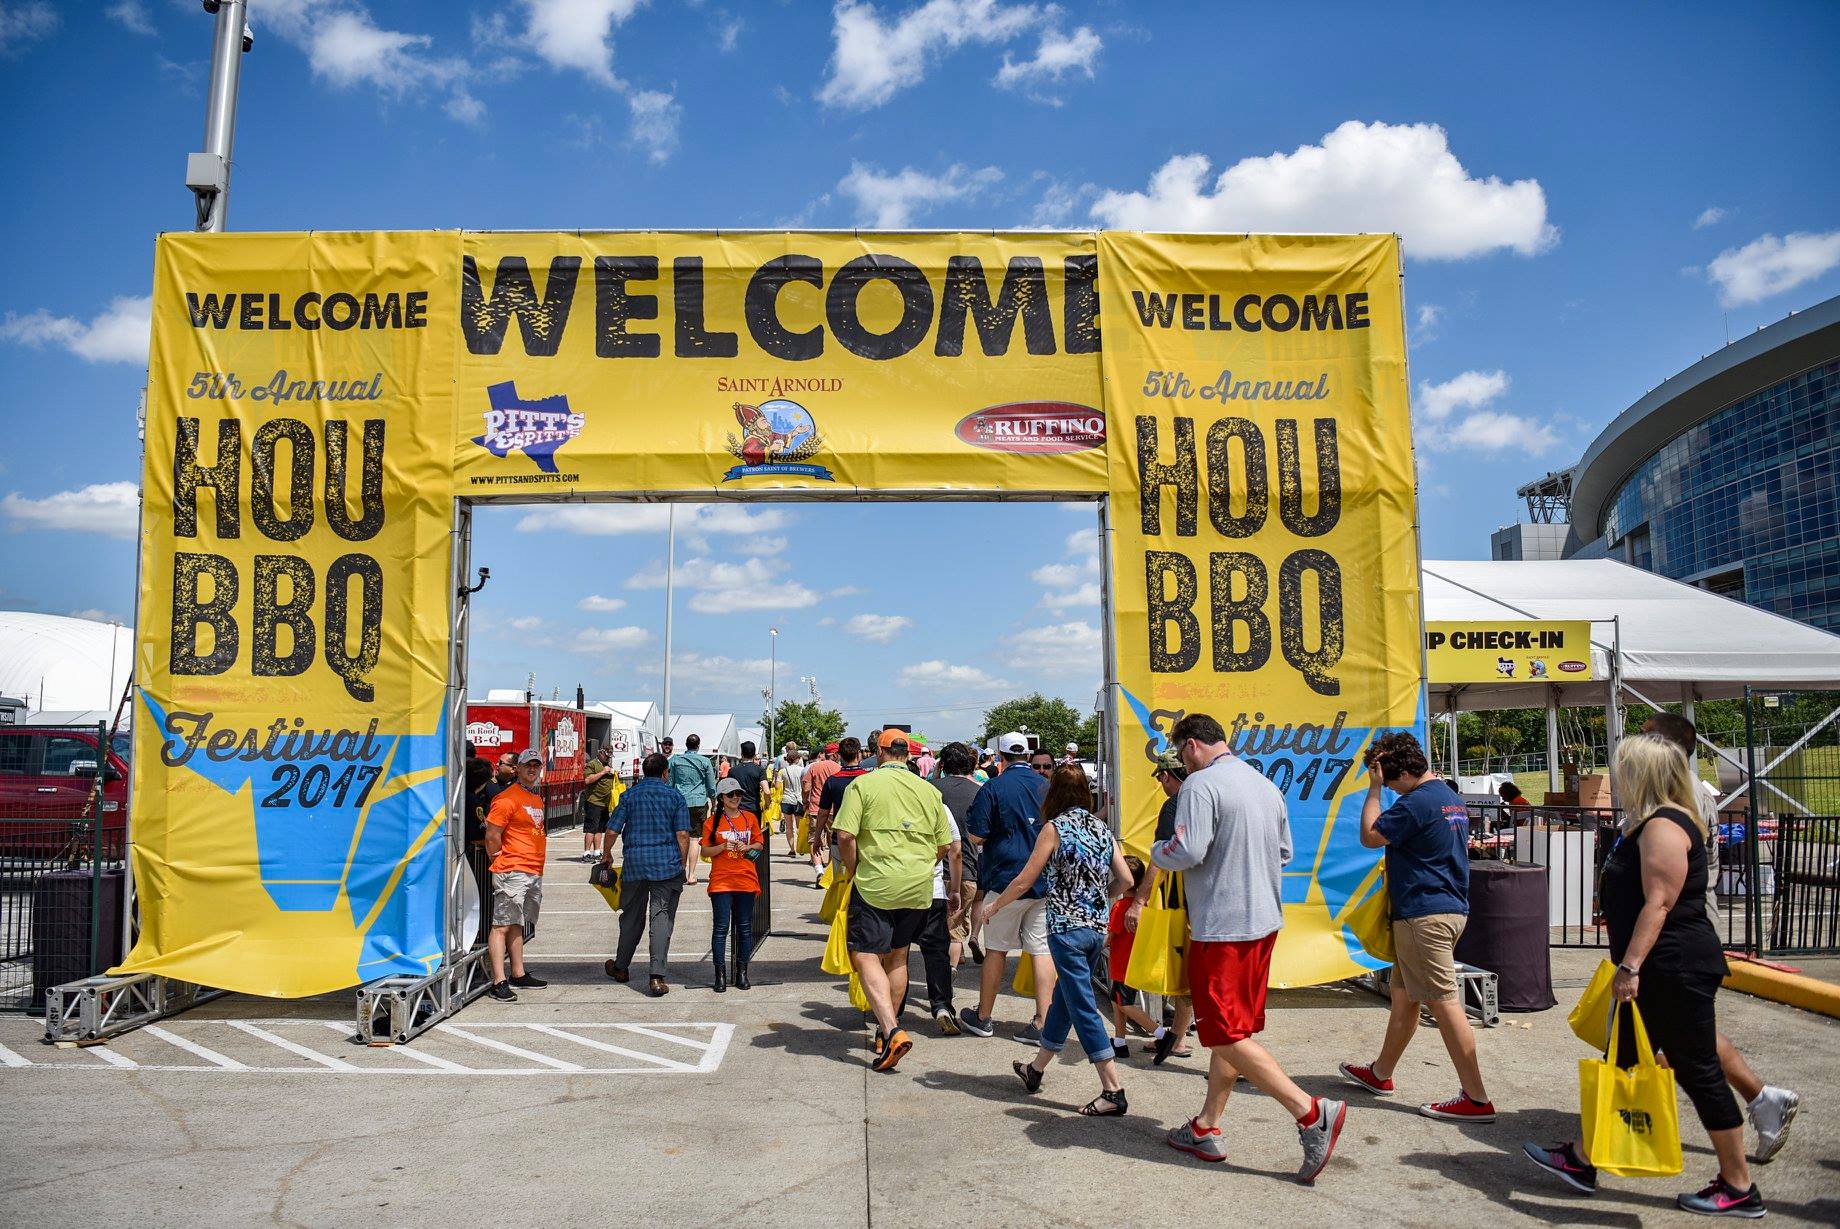 The 6th Annual Houston BBQ Festival is in HUMBLE, TEXAS THIS YEAR!